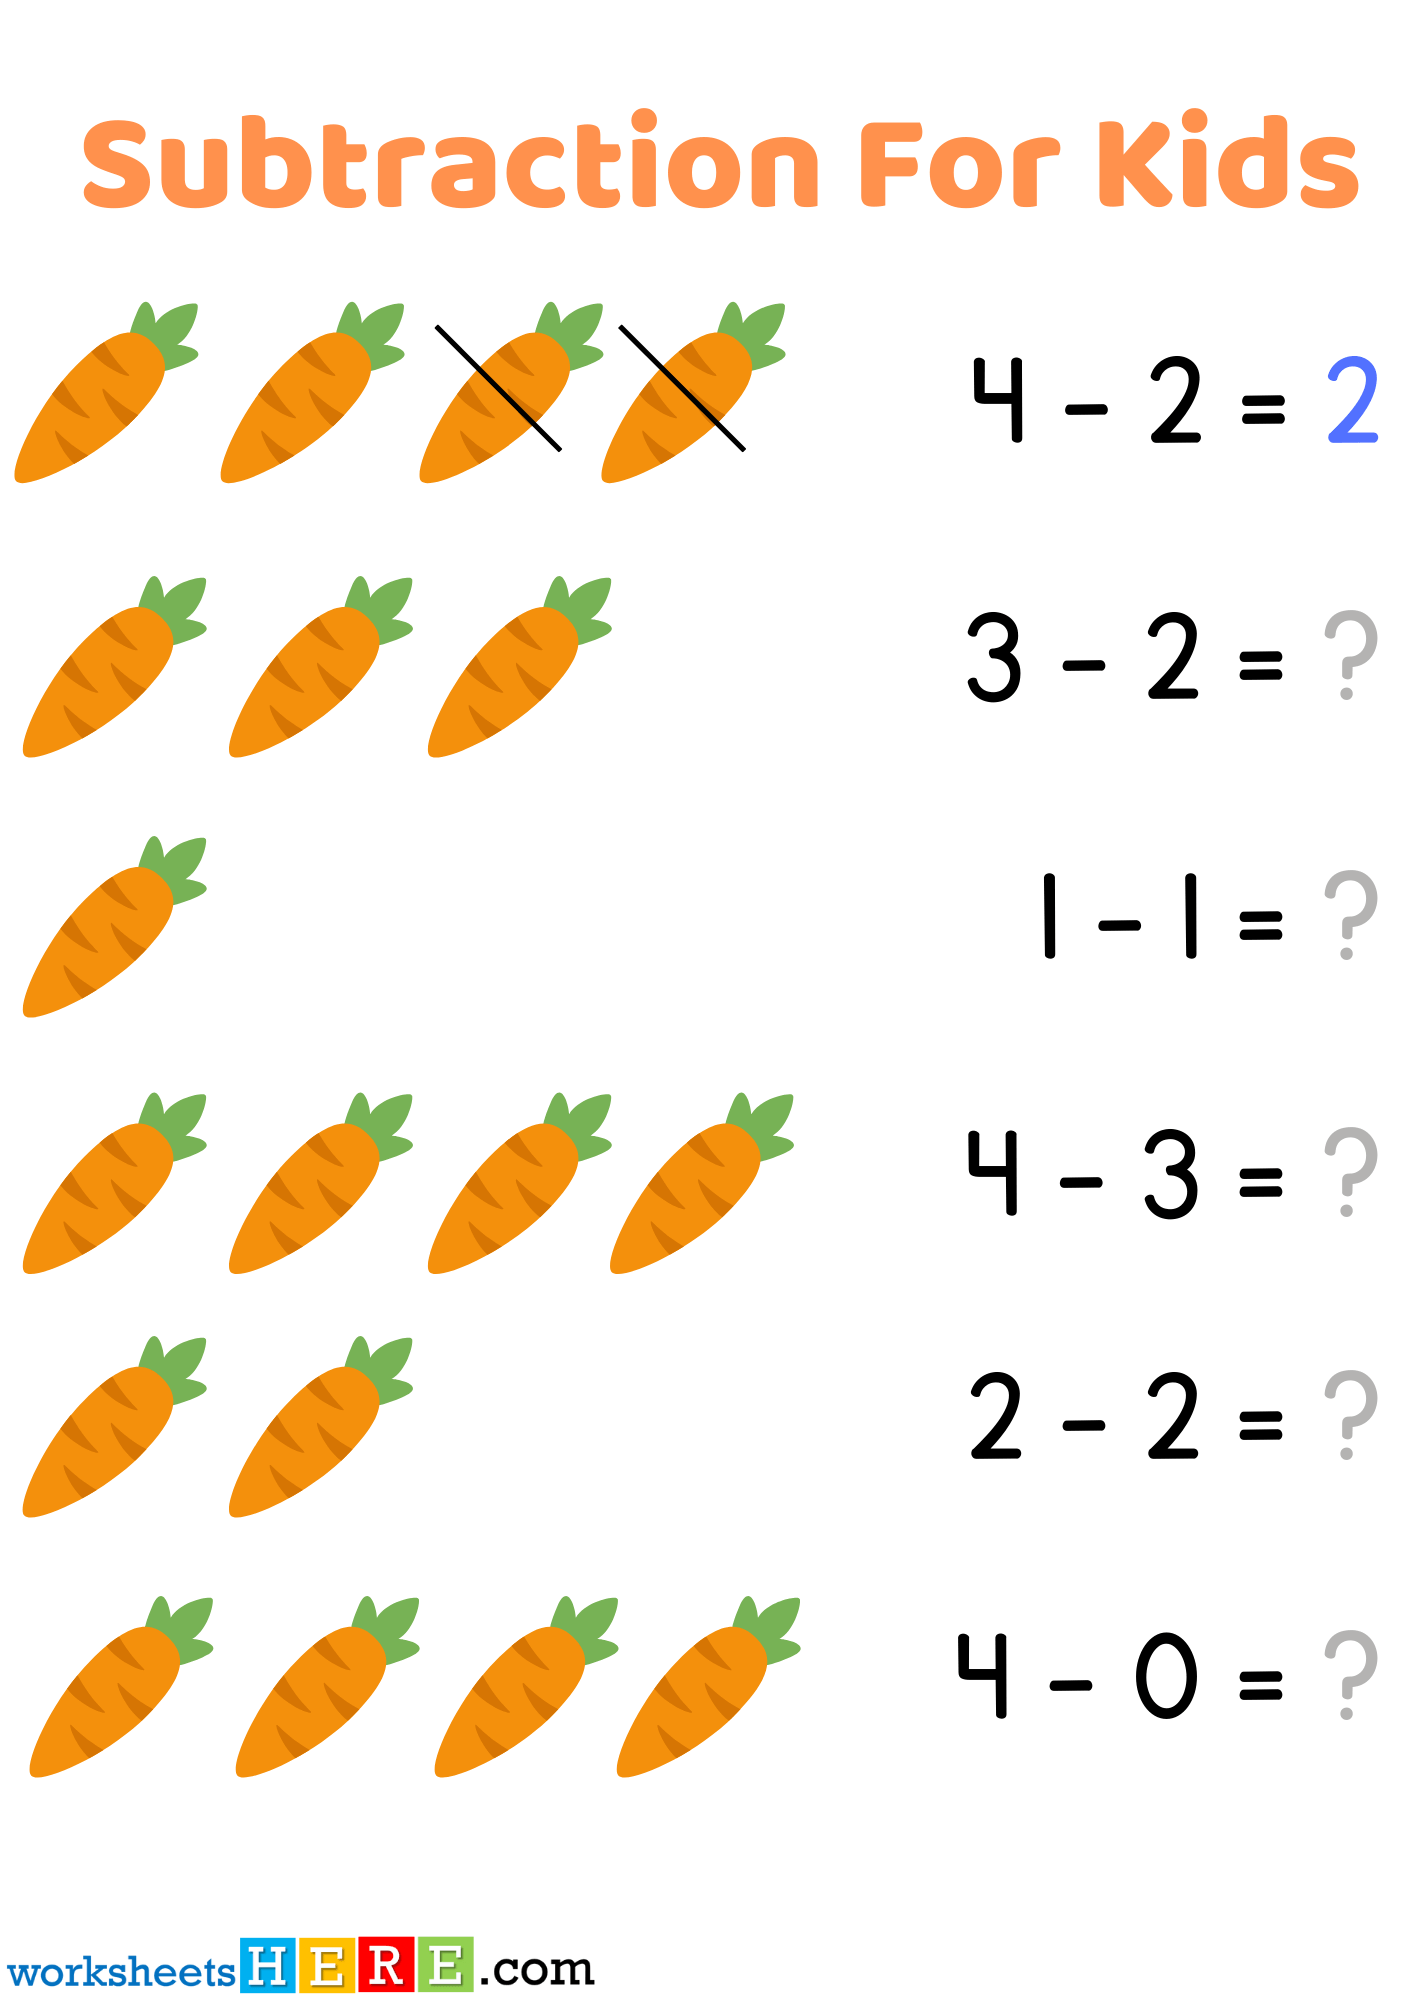 Subtraction Exercises with Carrots PDF Worksheet For Kindergarten and Kids